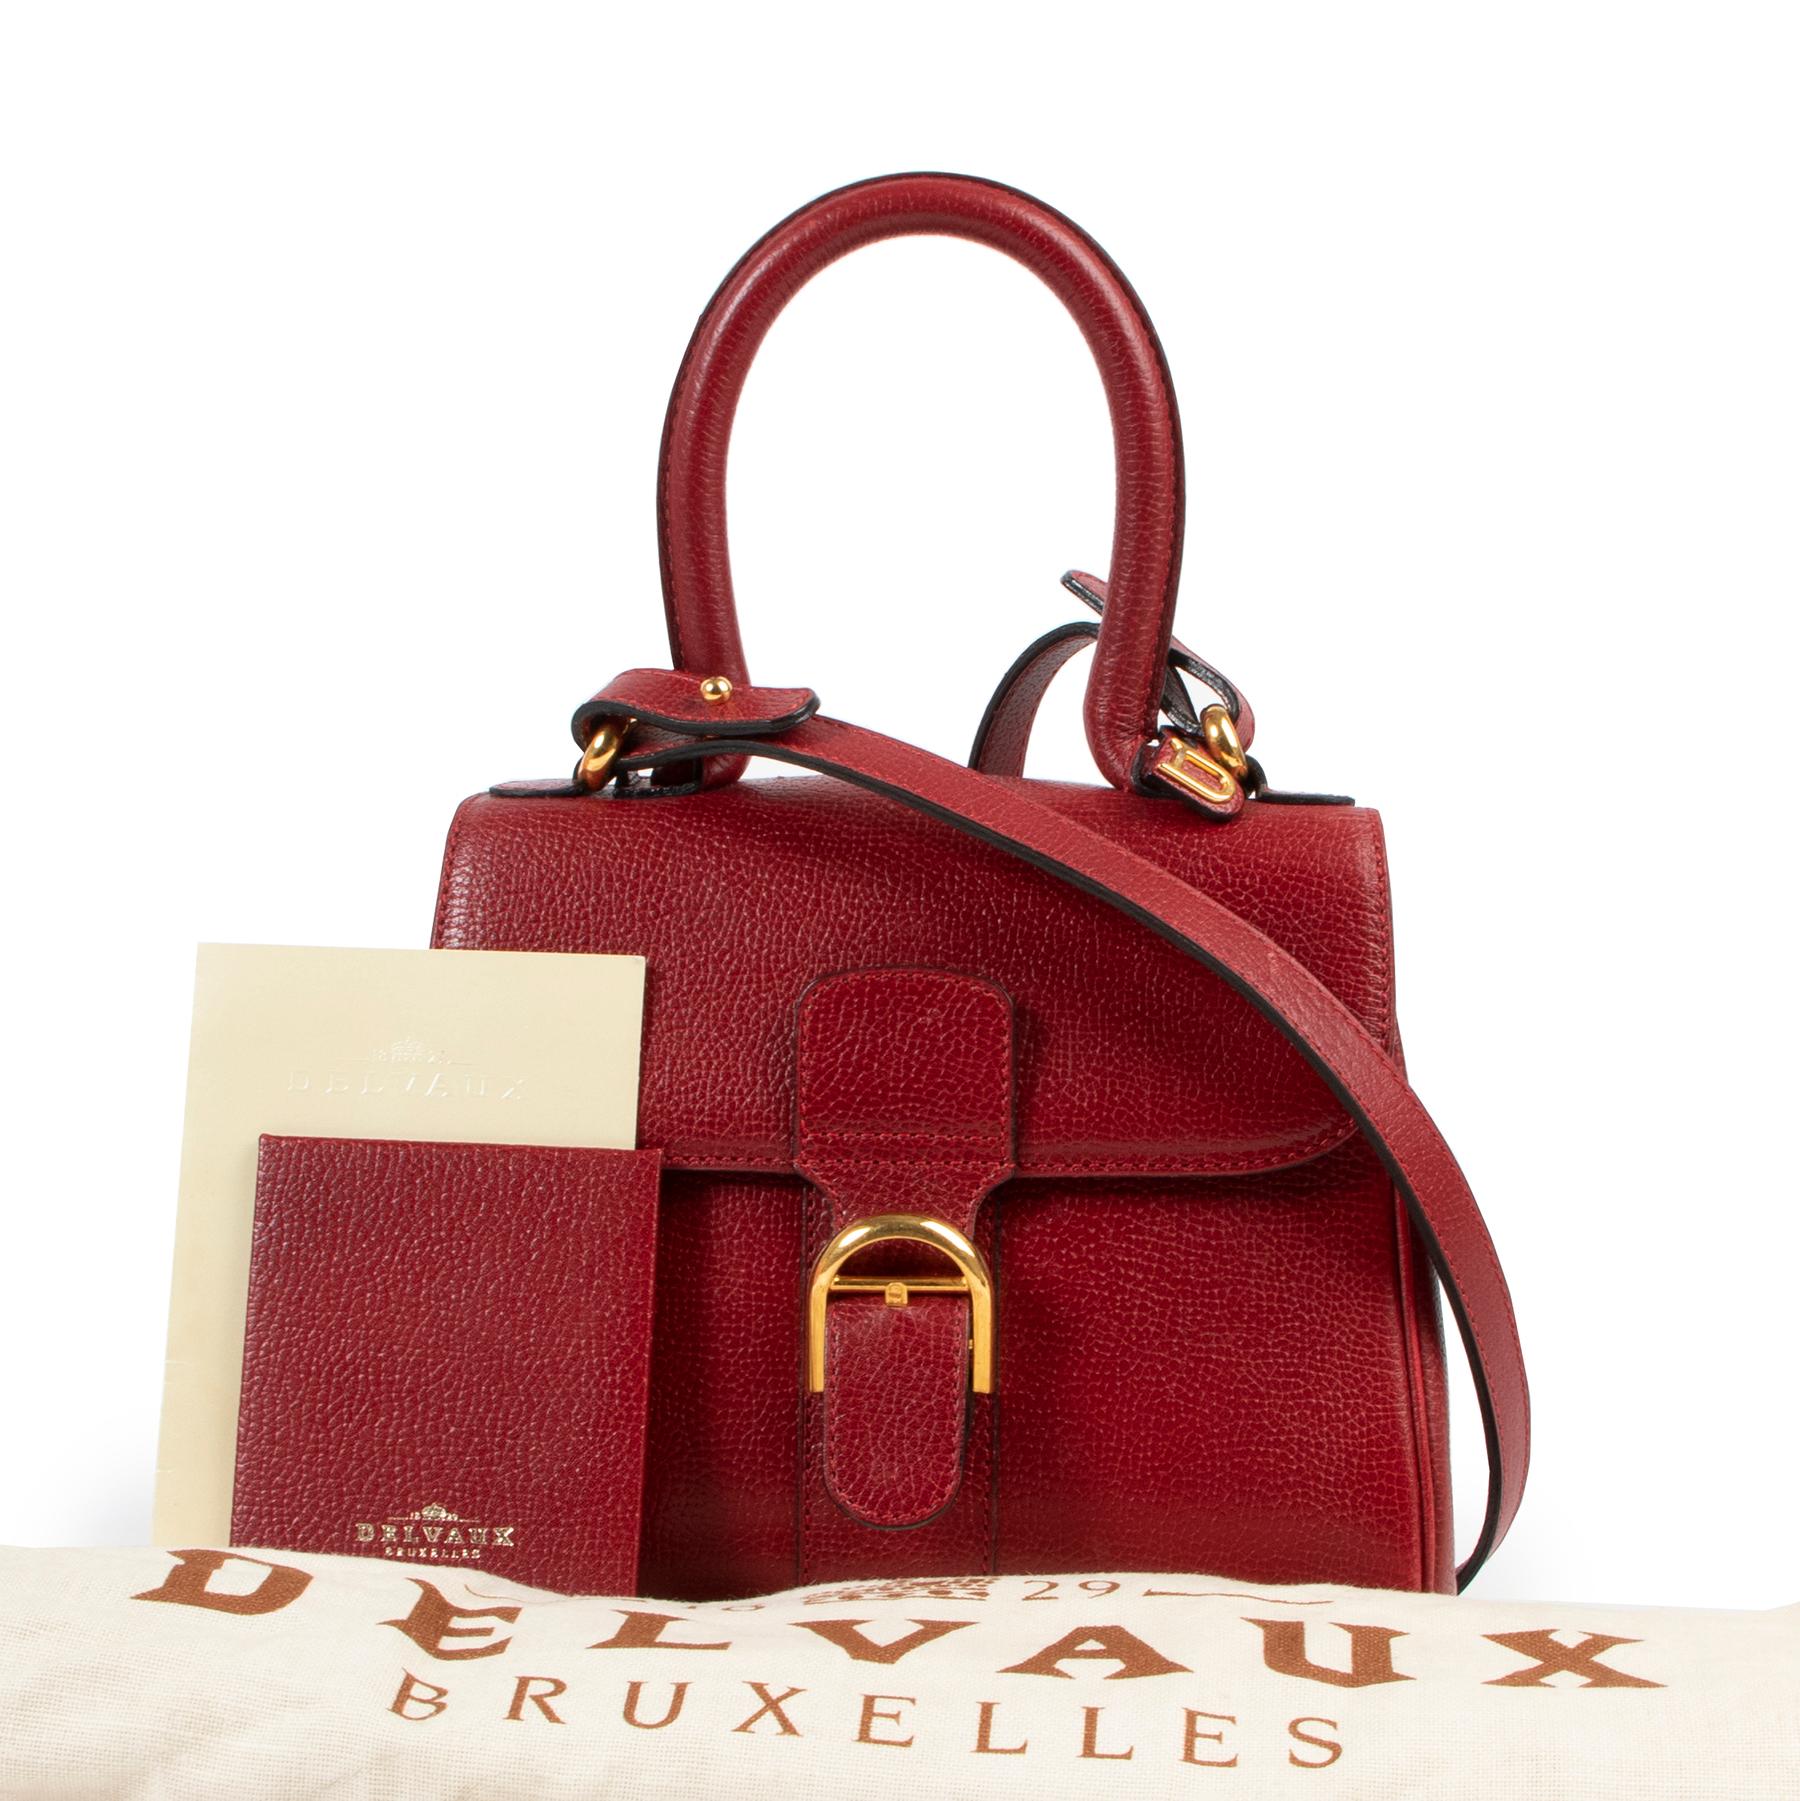 Delvaux Burgundy Mini Brillant GHW

What a stunner this cute Delvaux Mini Brillant. 
Crafted in warm red grained Rodeo leather. 
The iconic gold toned Brillant clasp gives acces to a super soft beige interior. 

Wear this cutie by hand or over the